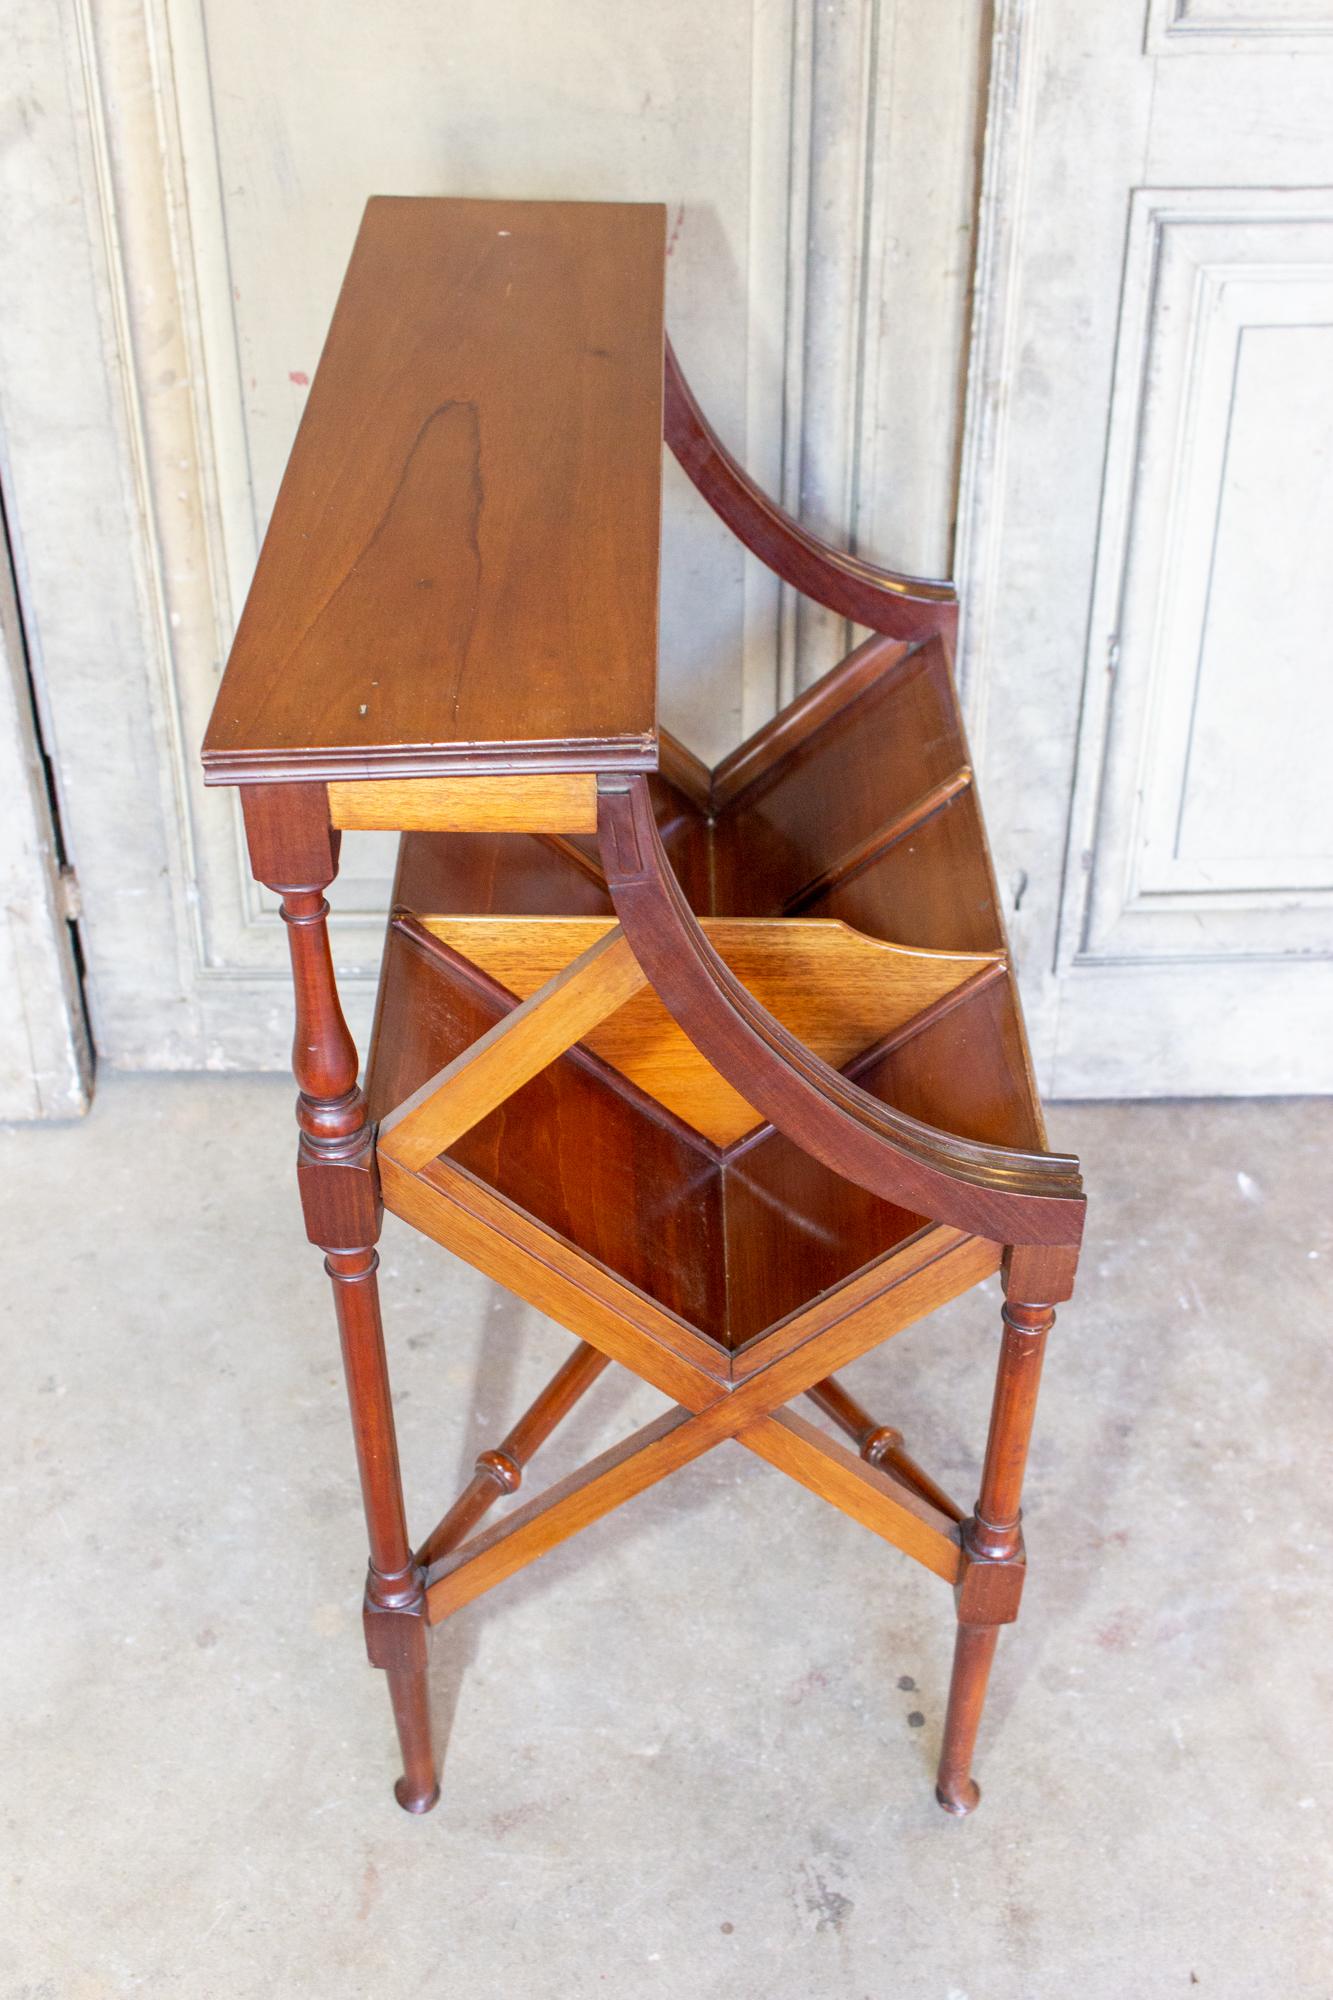 Wood 1920s English Shelf Table with Storage for Books and Records